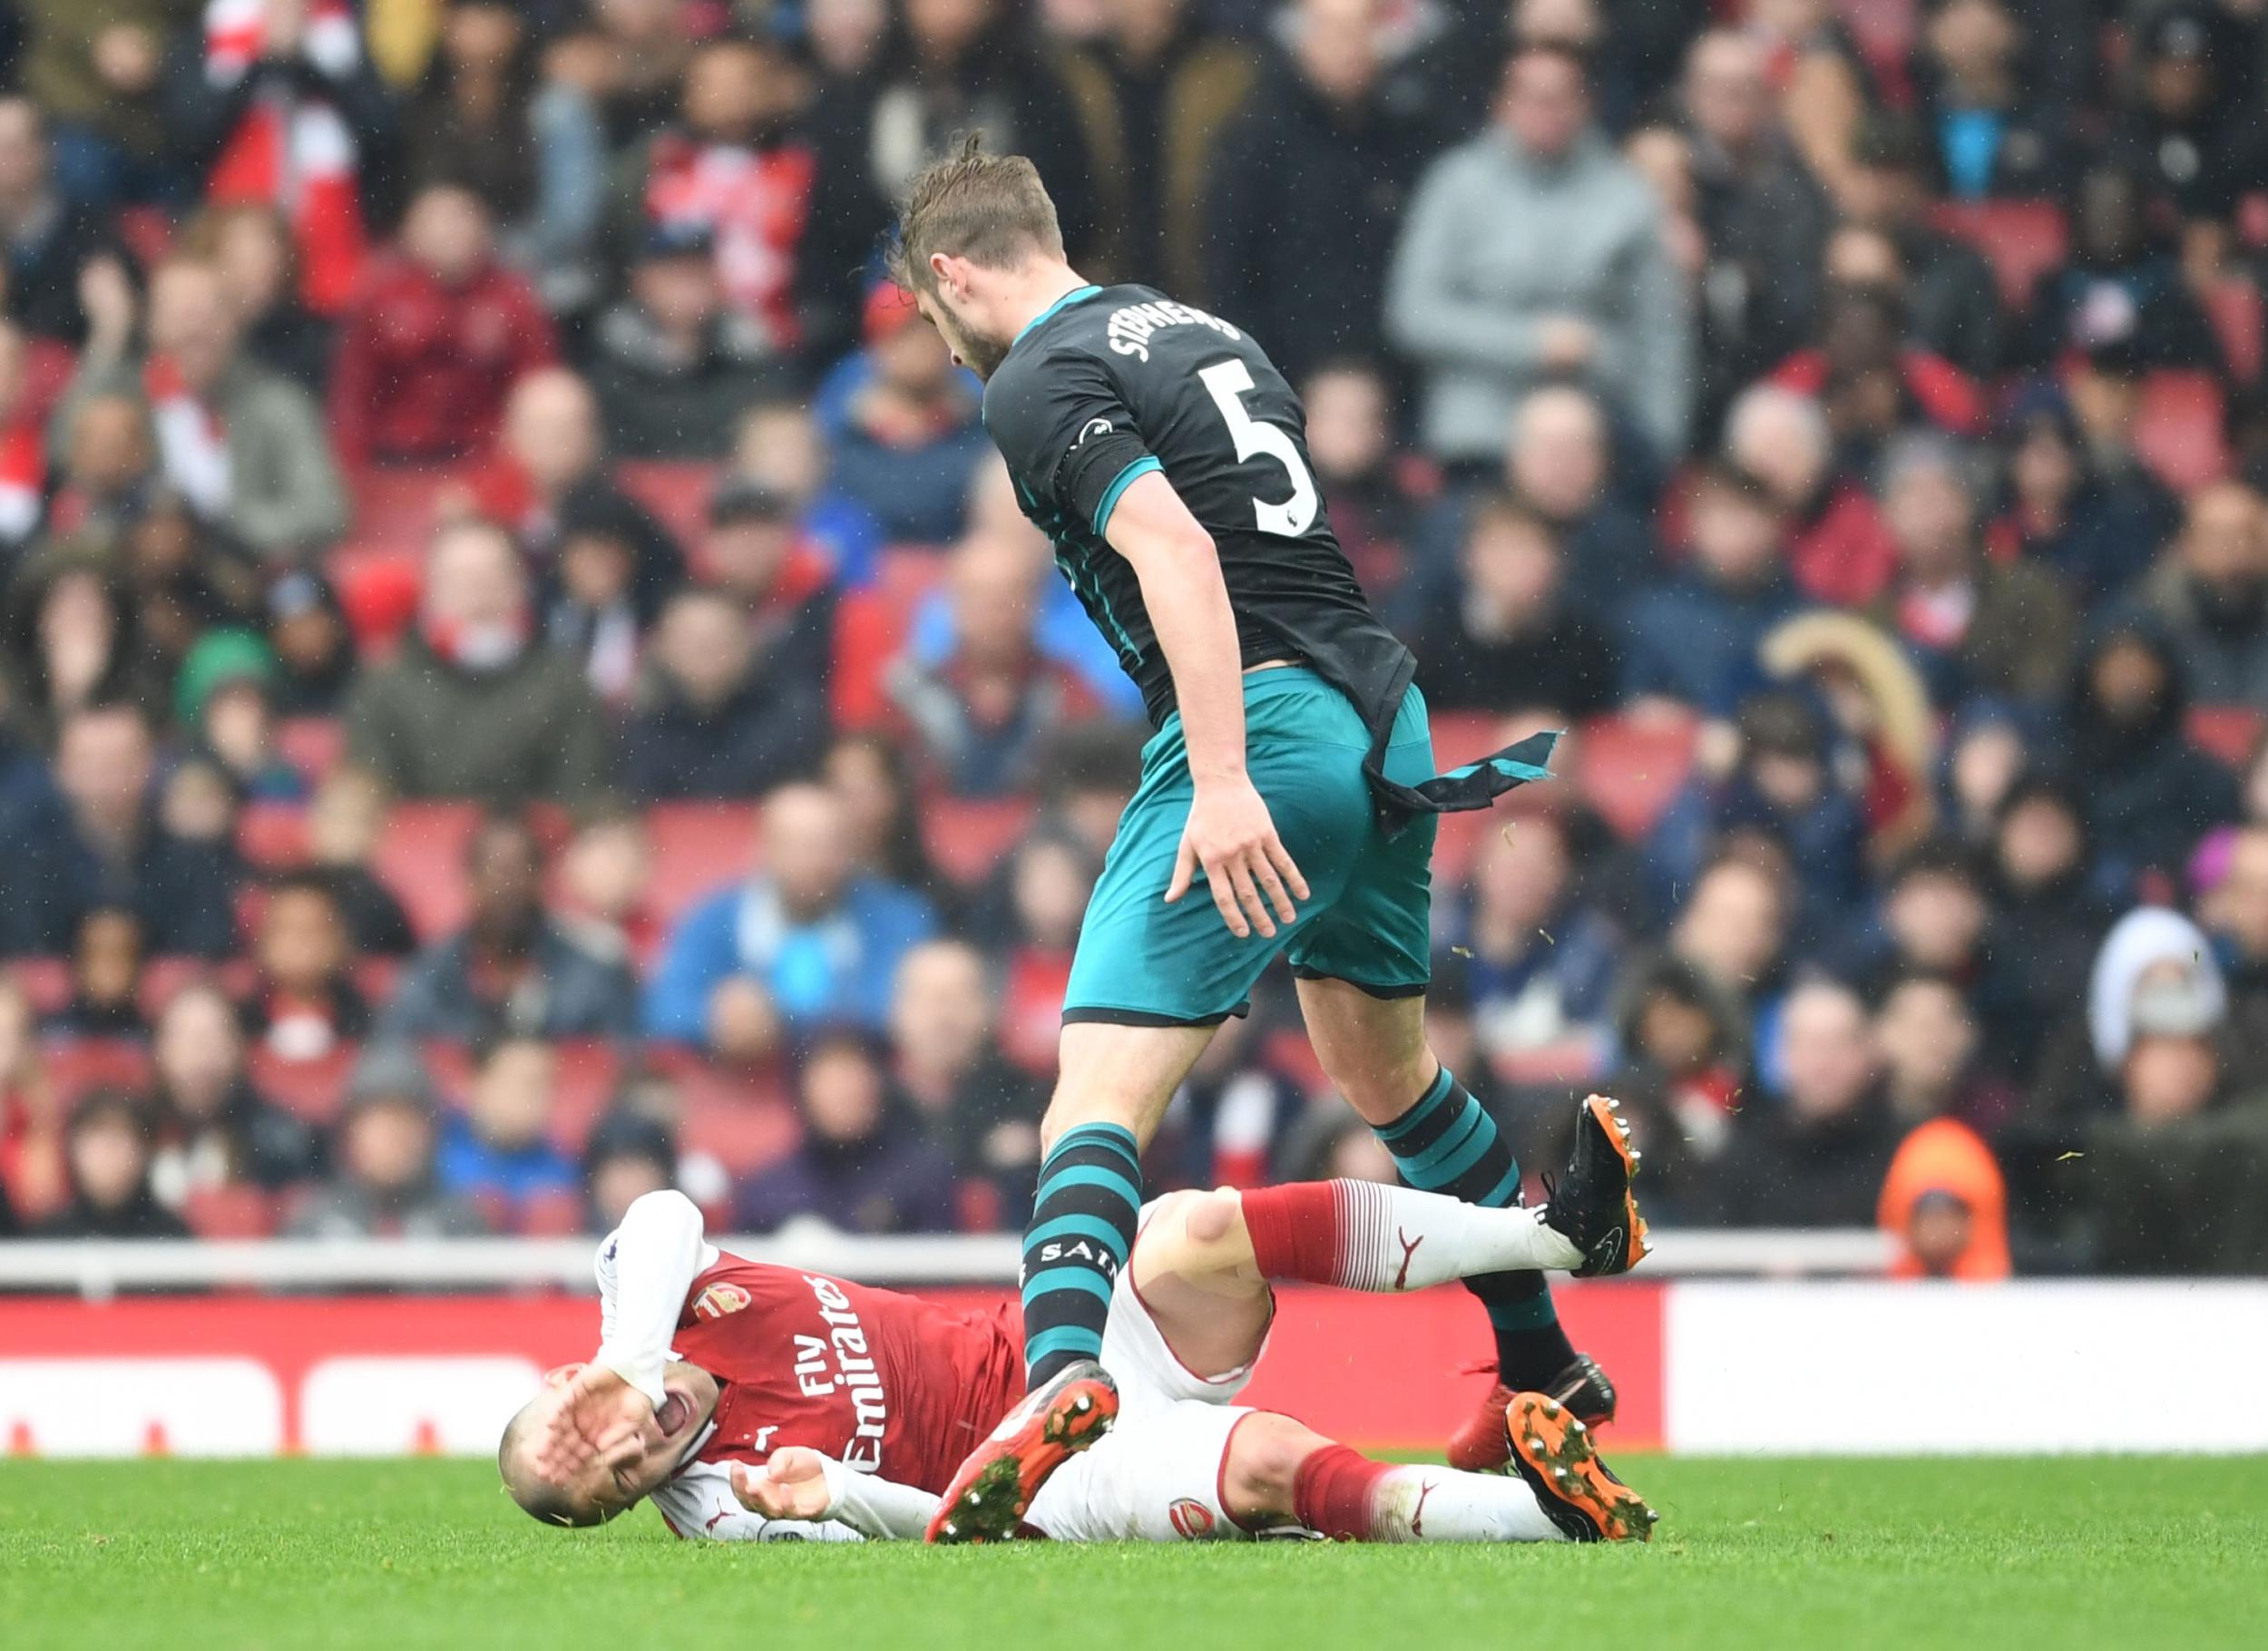 Arsenal's Jack Wilshere should have been sent off, says Southampton manager Mark Hughes